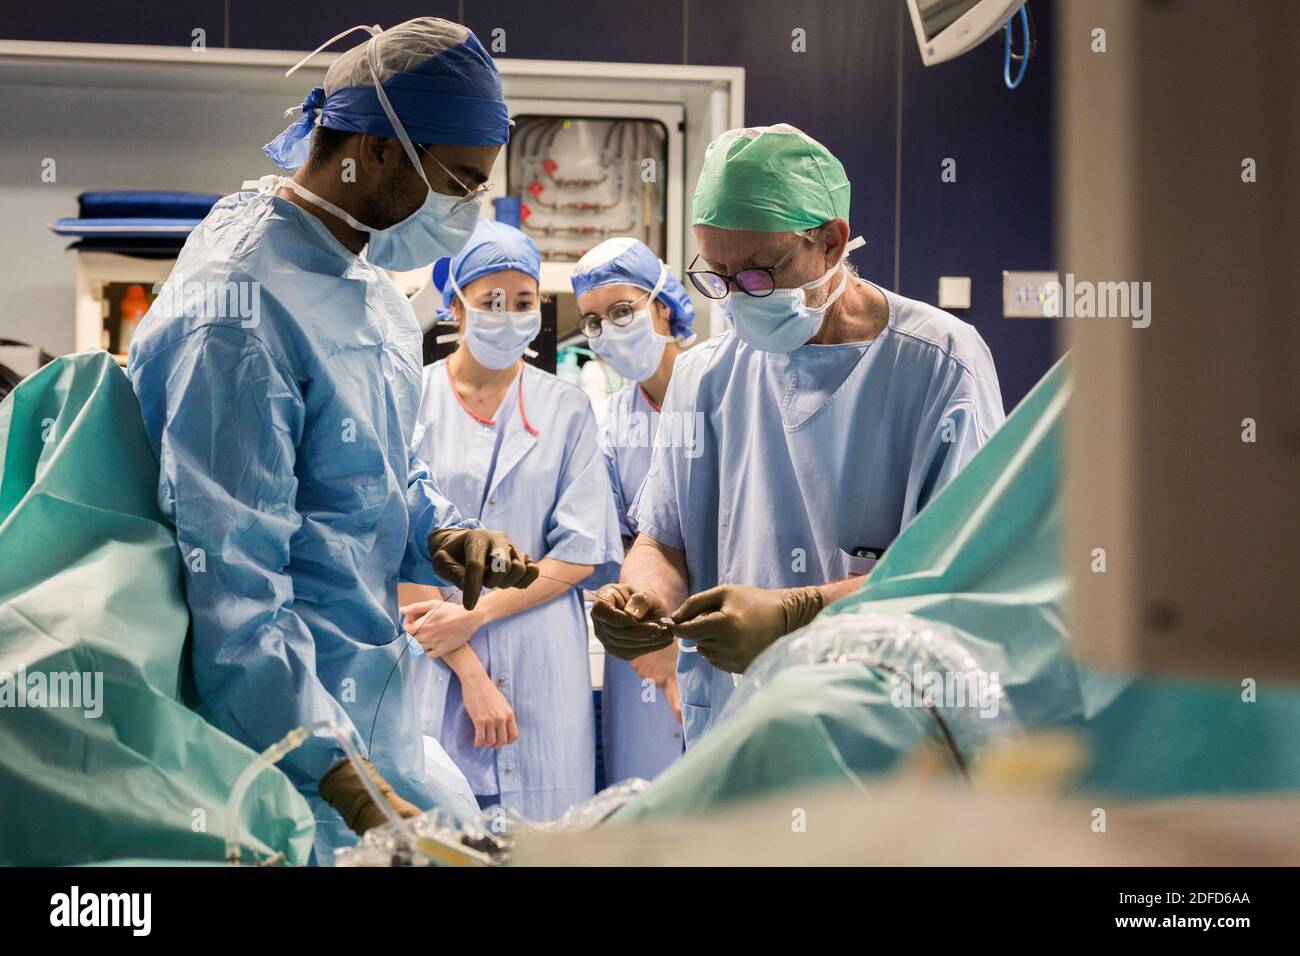 Medical students (external) in the operating room observing a professor and an intern during an operation (Urethrotomy) under endoscopy, Department of Stock Photo